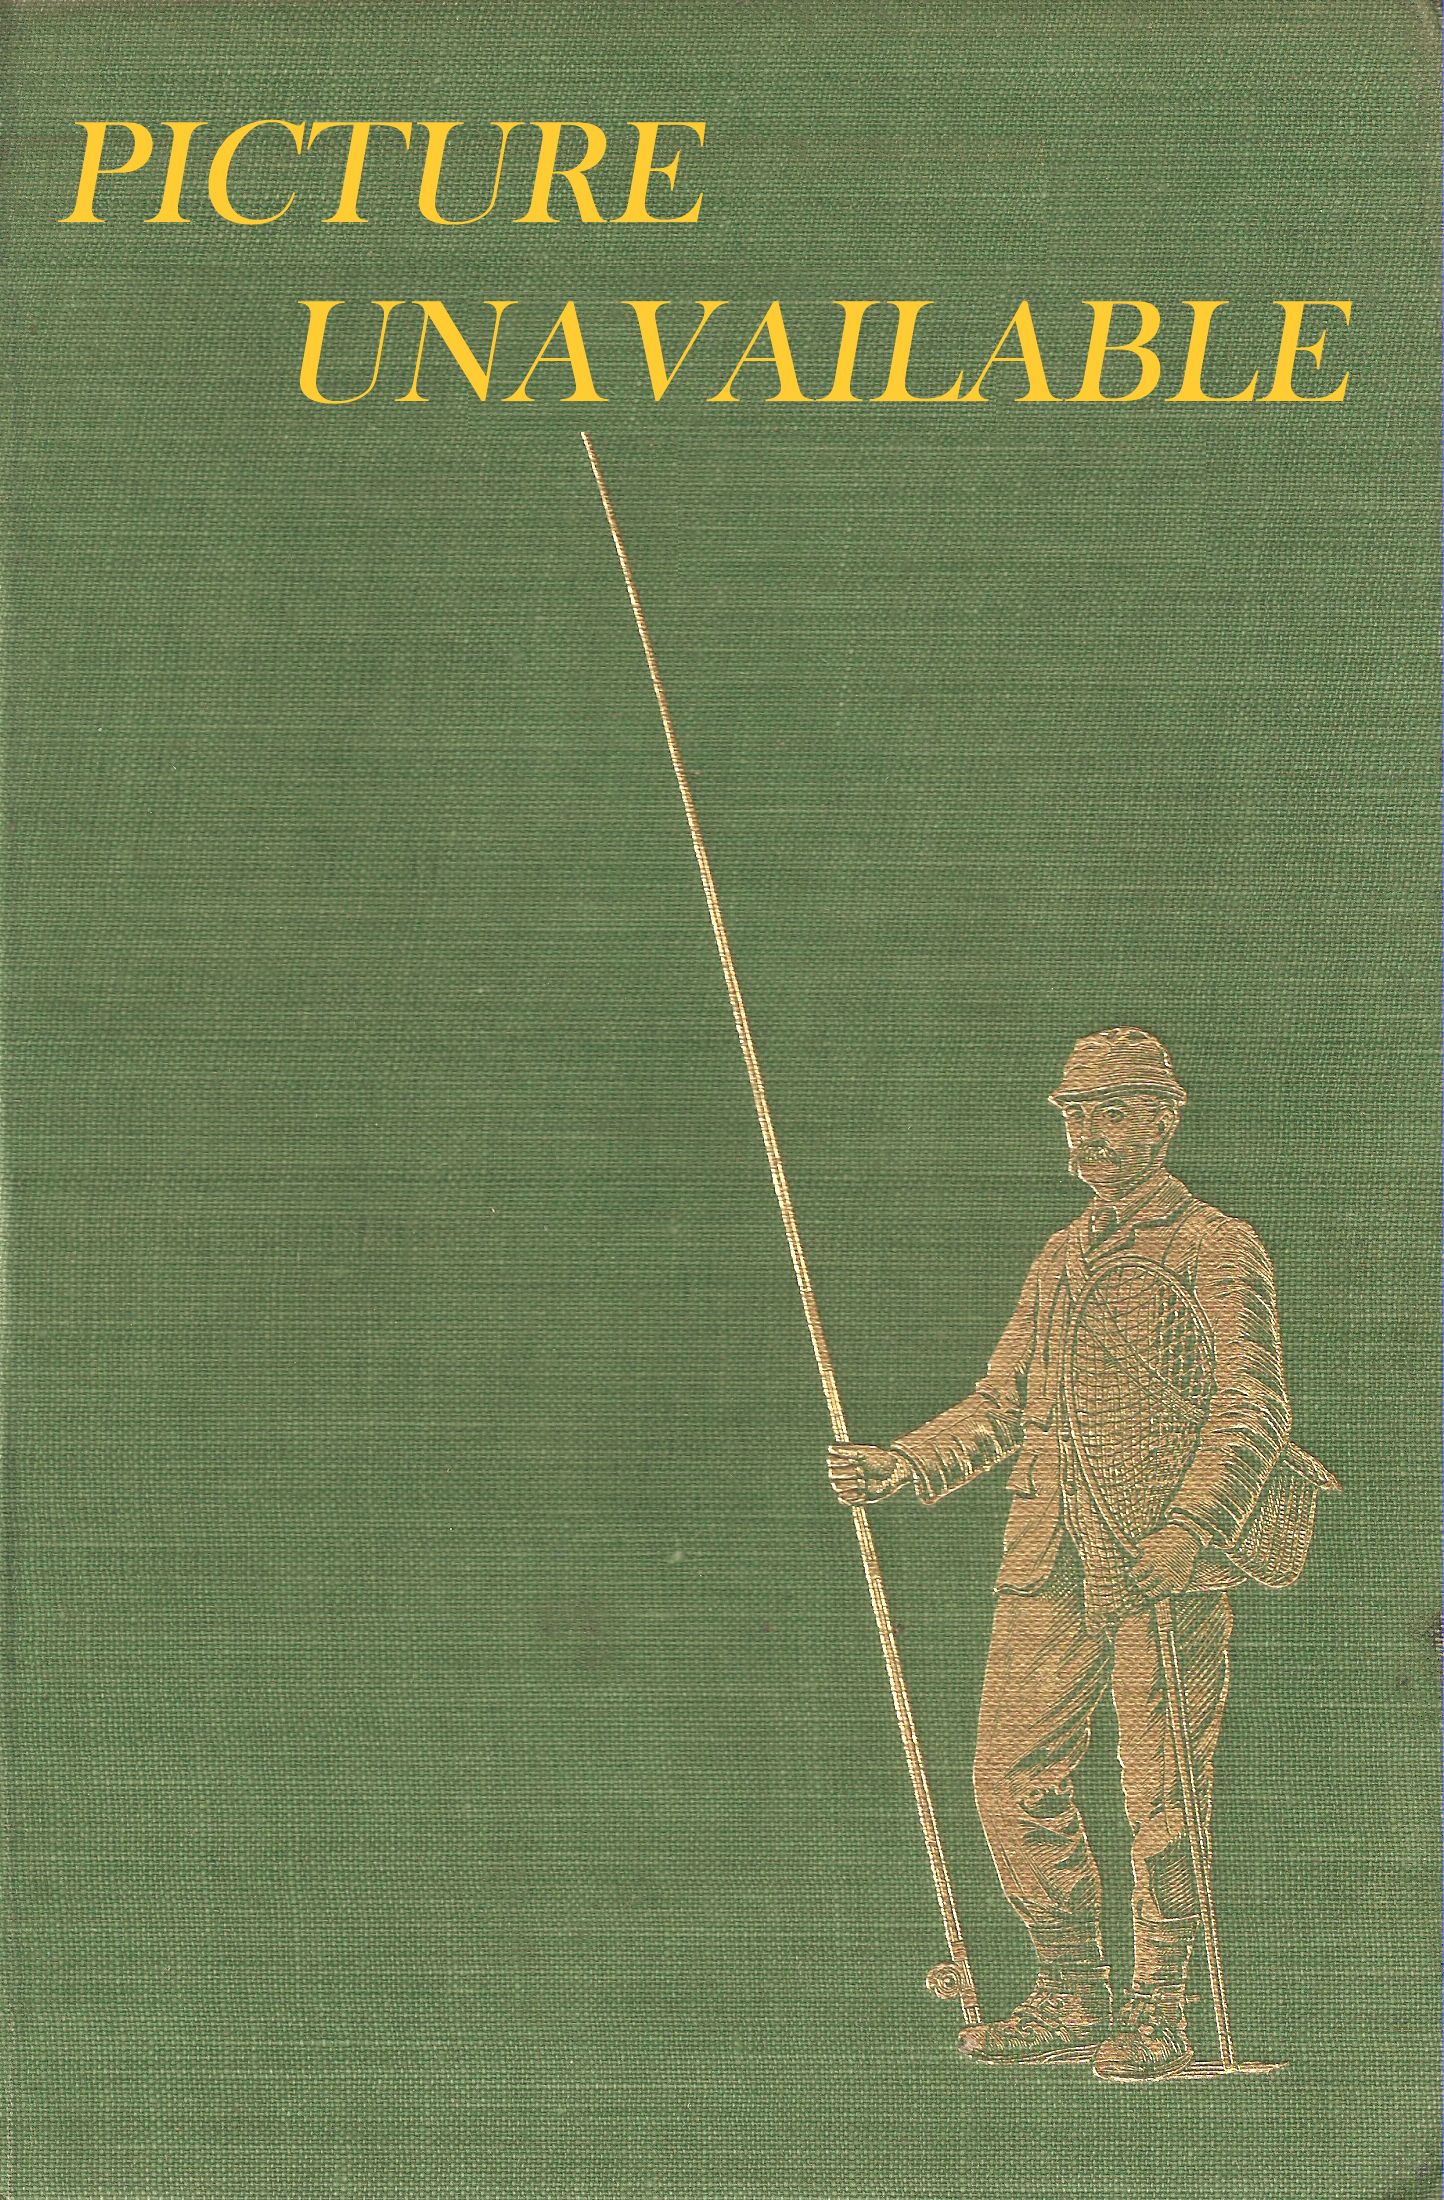 THE BARTLETT ANGLING COLLECTION: A list of books on angling, fishes and fish culture in the Harvard College Library. By Louise Rankin Albee.